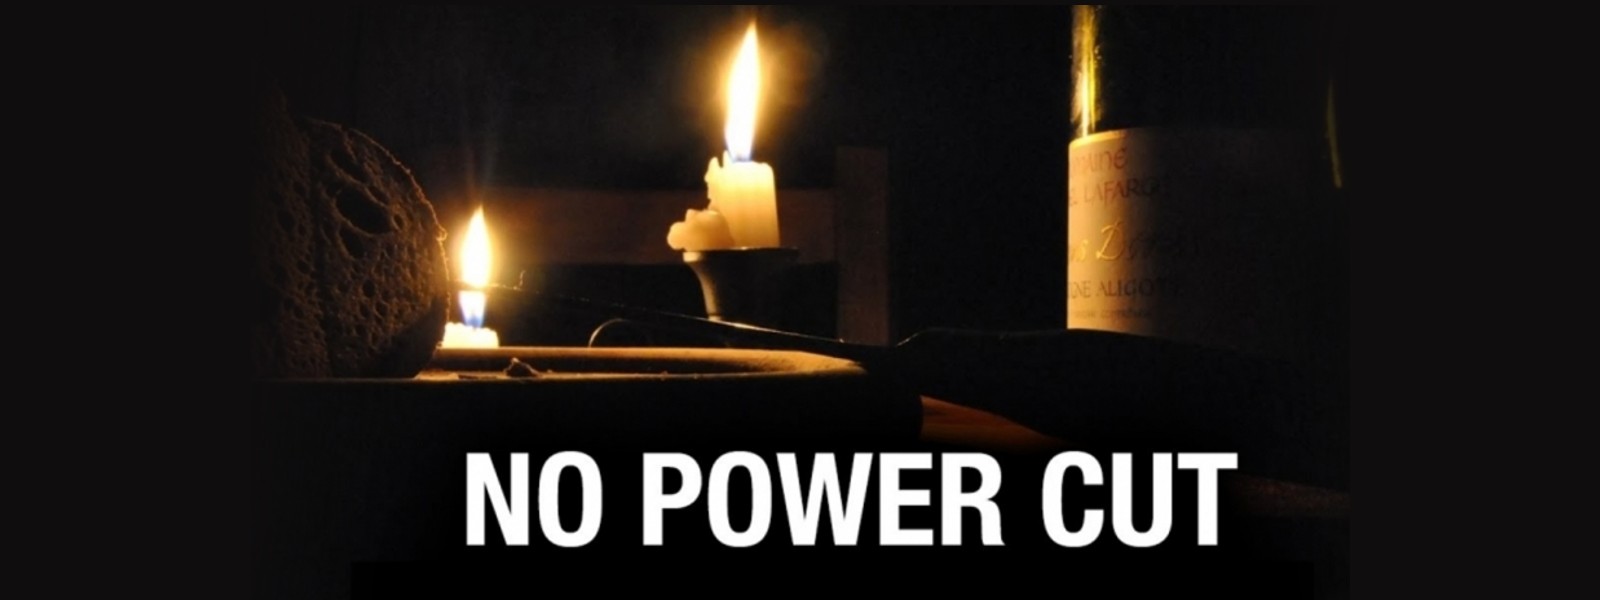 NO power cuts on 6th & 7th August